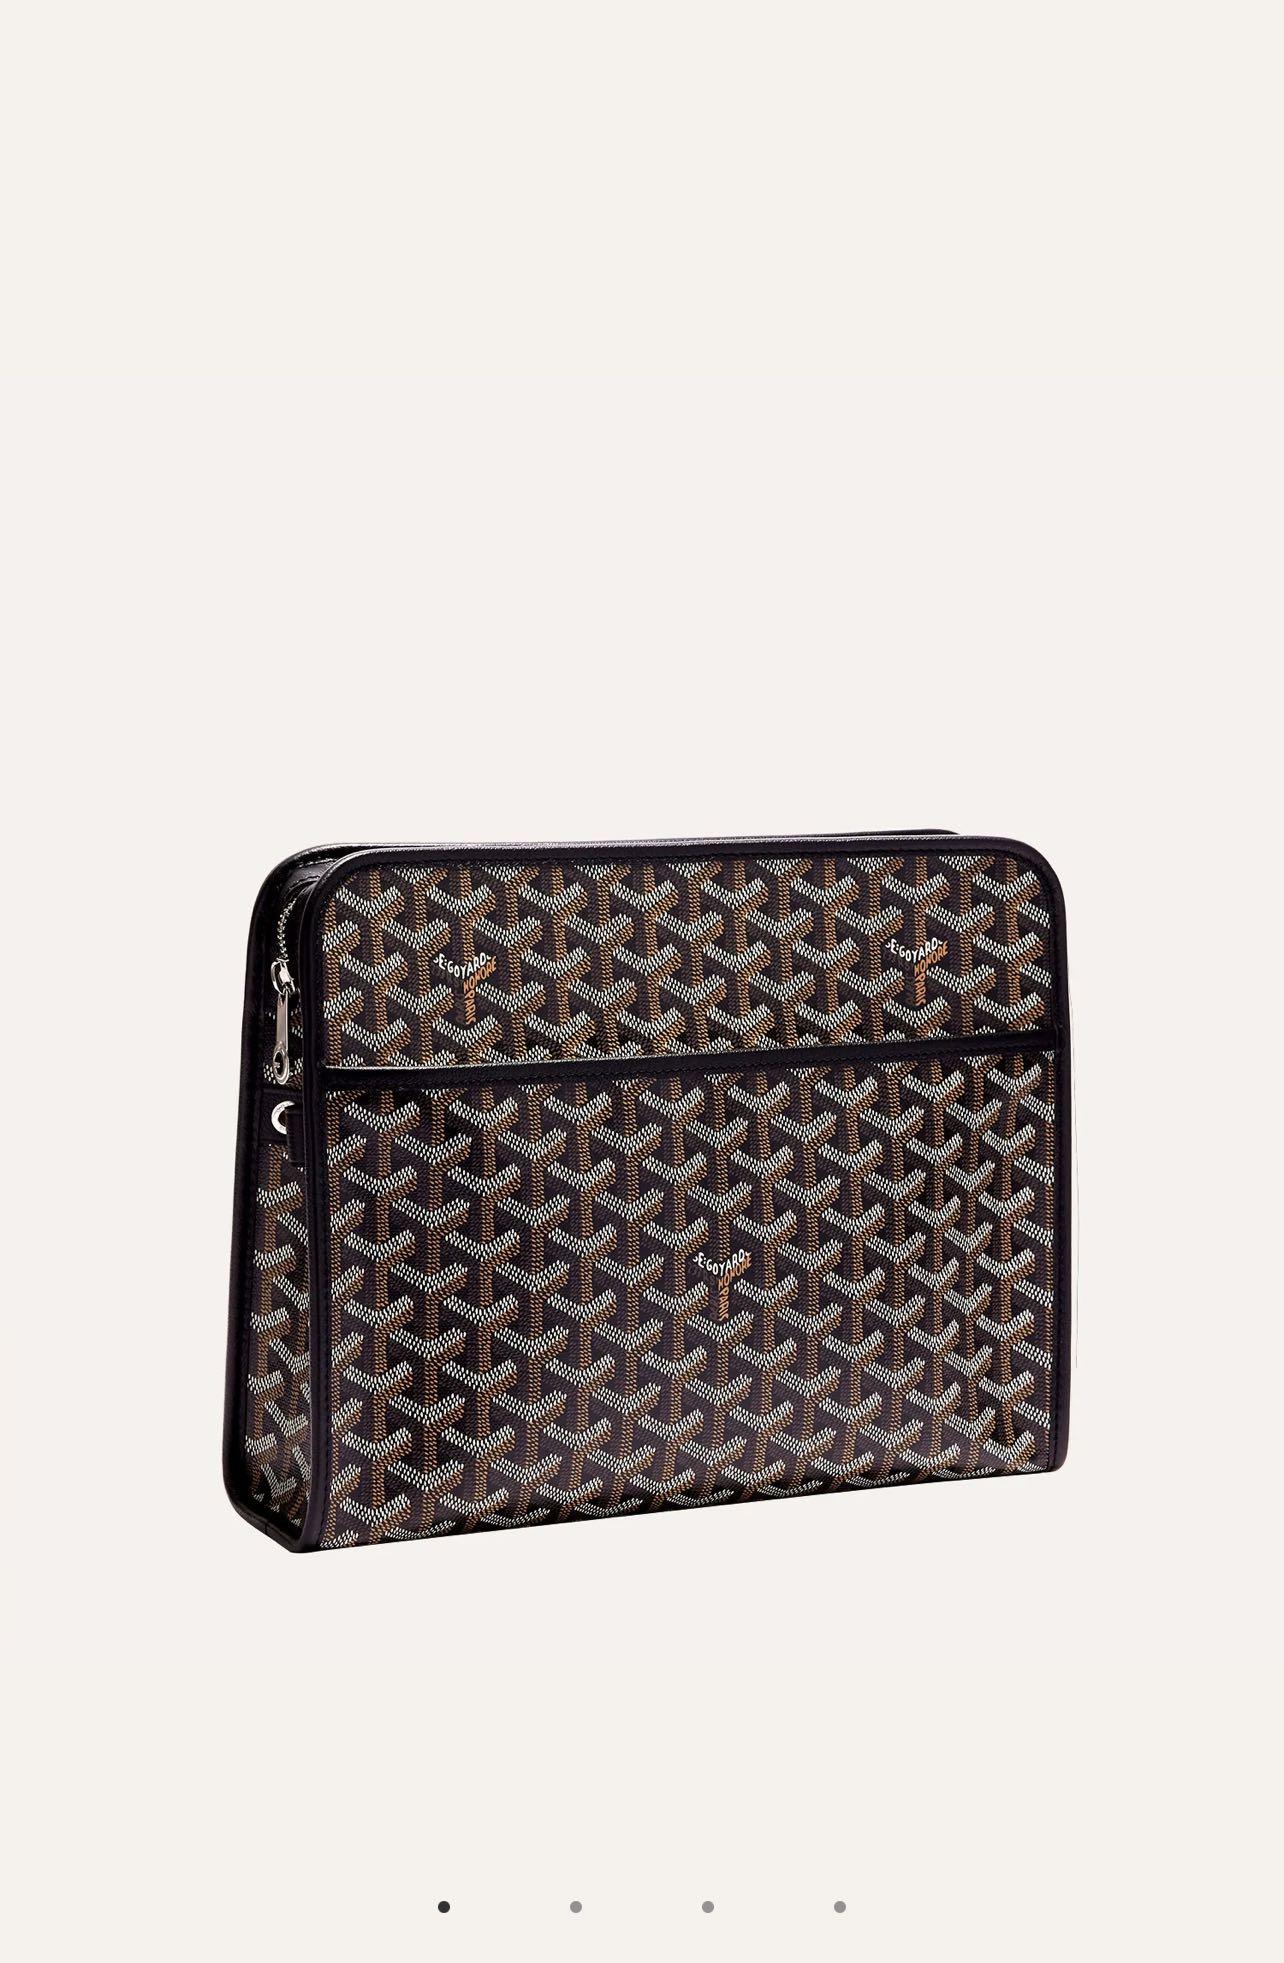 2021 New Style Goyard Jouvence Toiletry Pouch GM Top Quality Copy